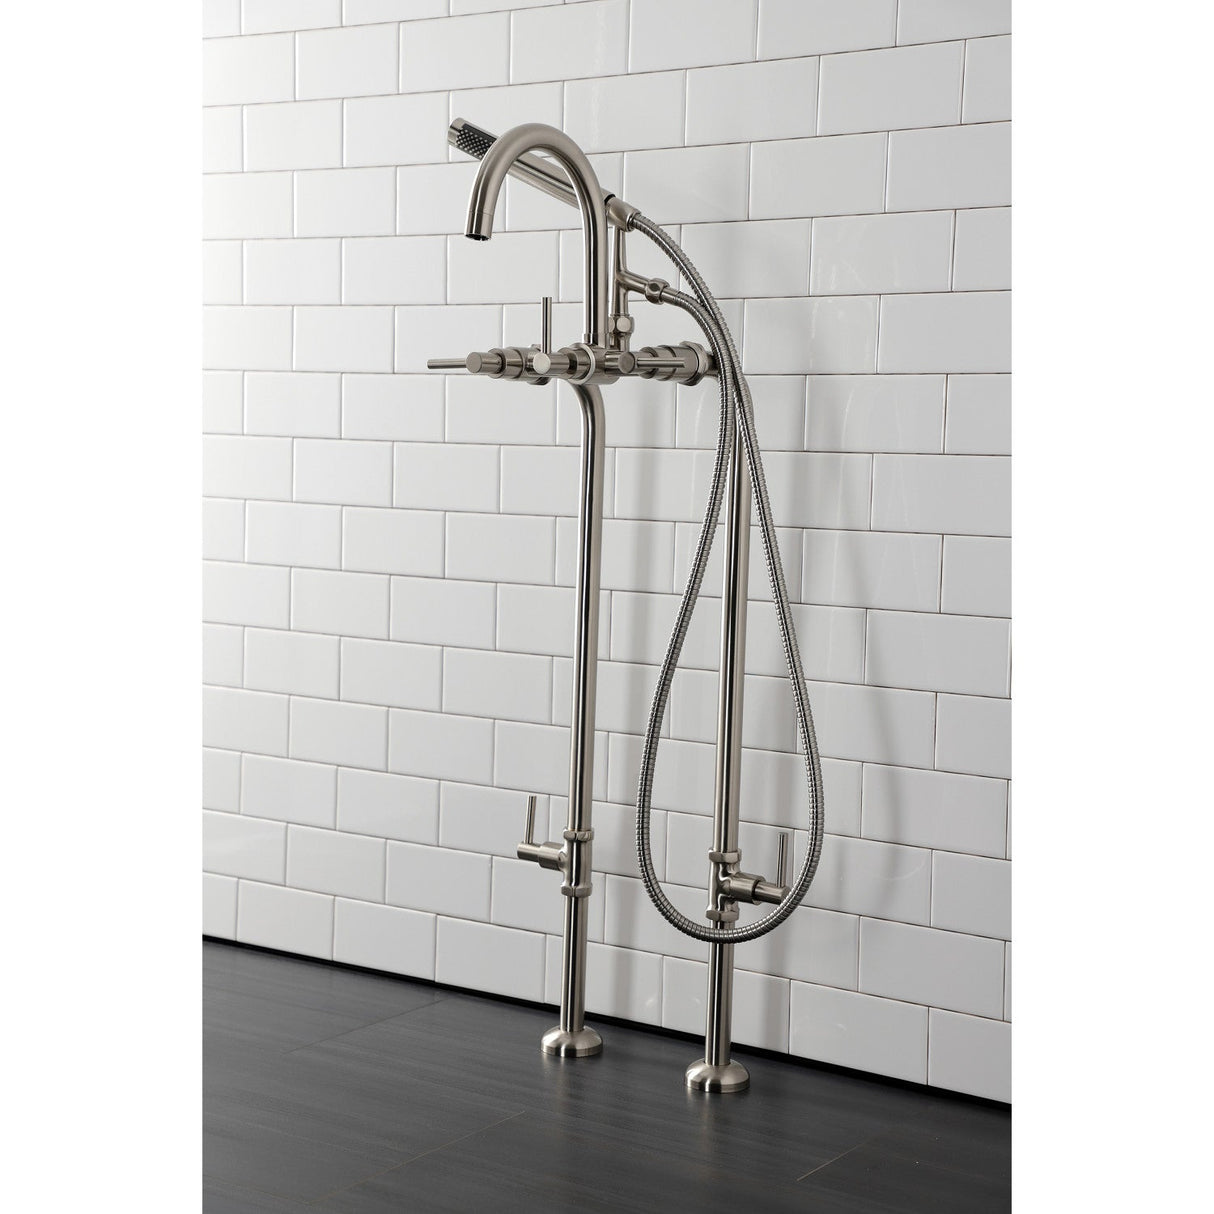 Concord CCK8108DL Freestanding Tub Faucet with Supply Line and Stop Valve, Brushed Nickel